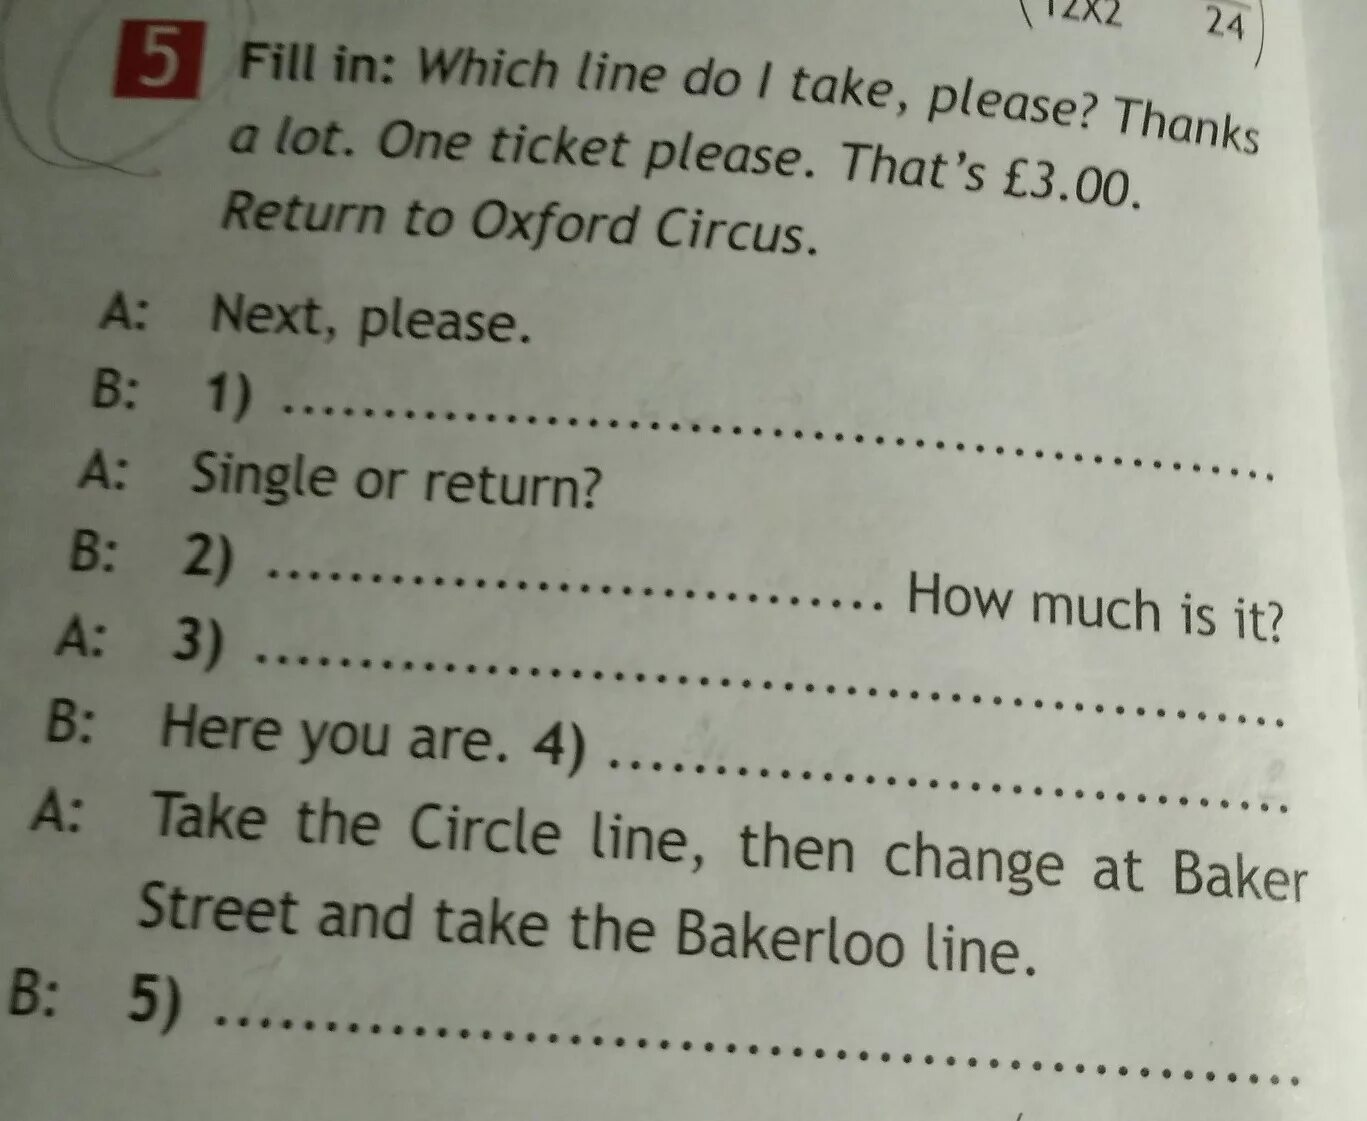 Fill in whatever. Complete the Dialogue use which line do i take please. Complete the Dialogue use which line do take please thanks a lot one ticket please that's£ 3 00 Return to Oxford Circus. Thanks a lot. Nest please two tickets please как читается.